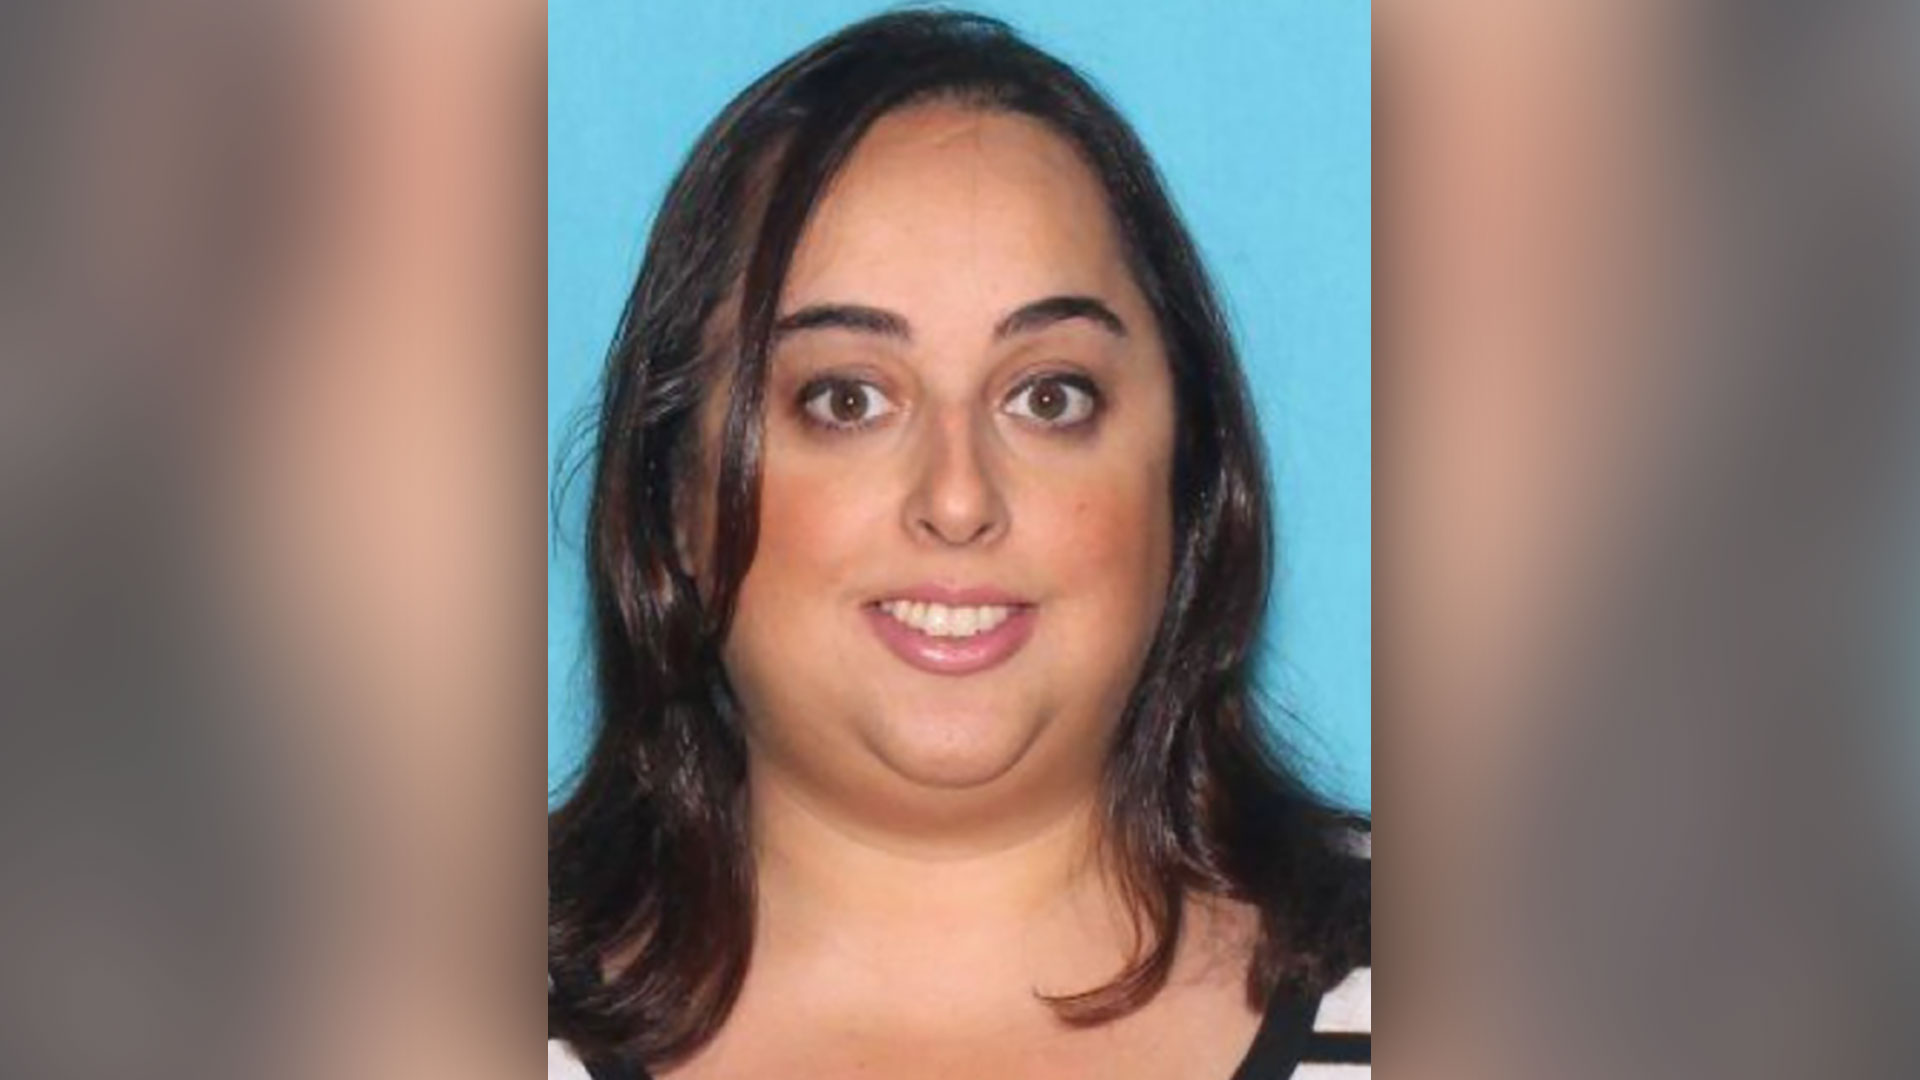 New York authorities released this image of Peaches Stergo, the woman accused of defrauding an 87-year-old man